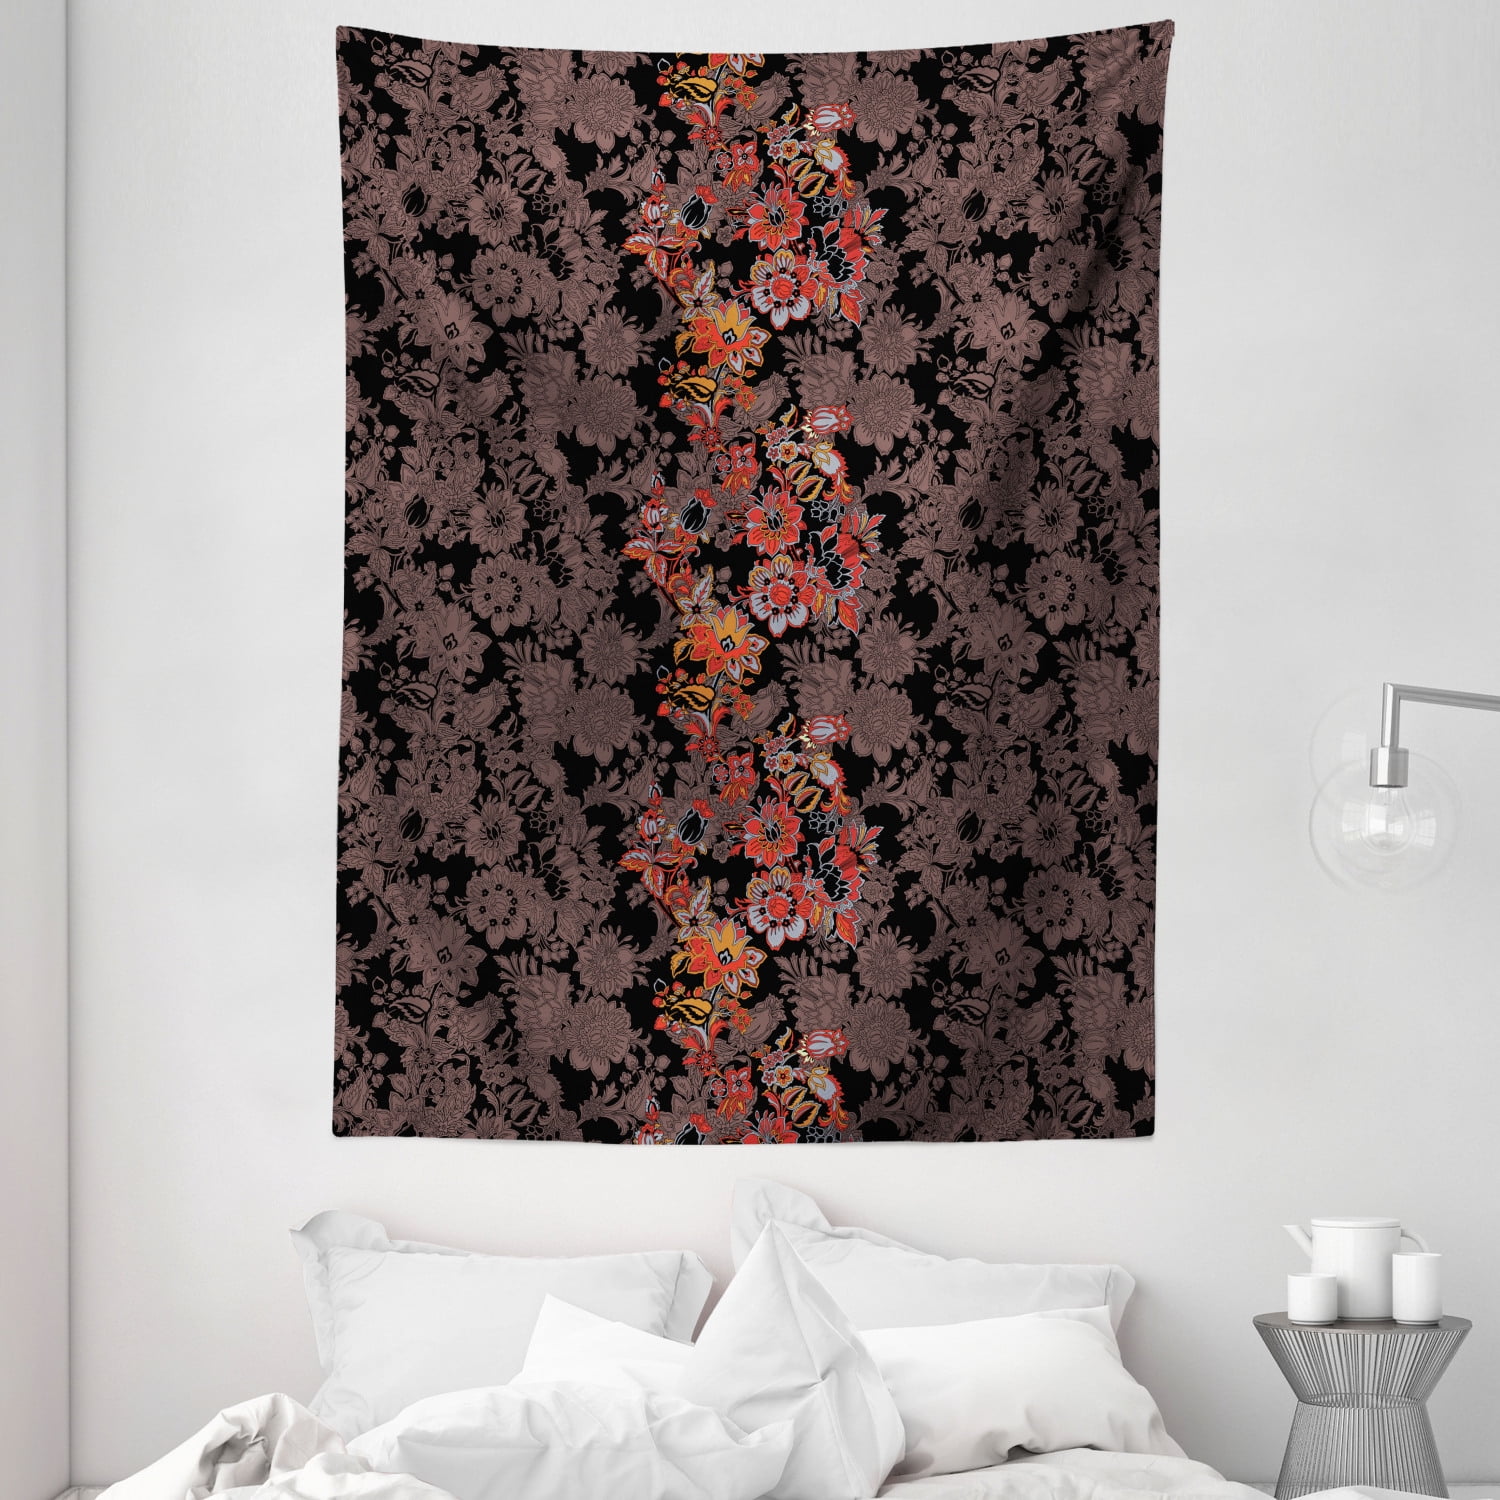 Flower Tapestry, Flowers of Asia in Japanese Art Style Vivid Floral Pattern  Boho Print, Wall Hanging for Bedroom Living Room Dorm Decor, 60W X 80L  Inches, Black Orange Mustard, by Ambesonne 